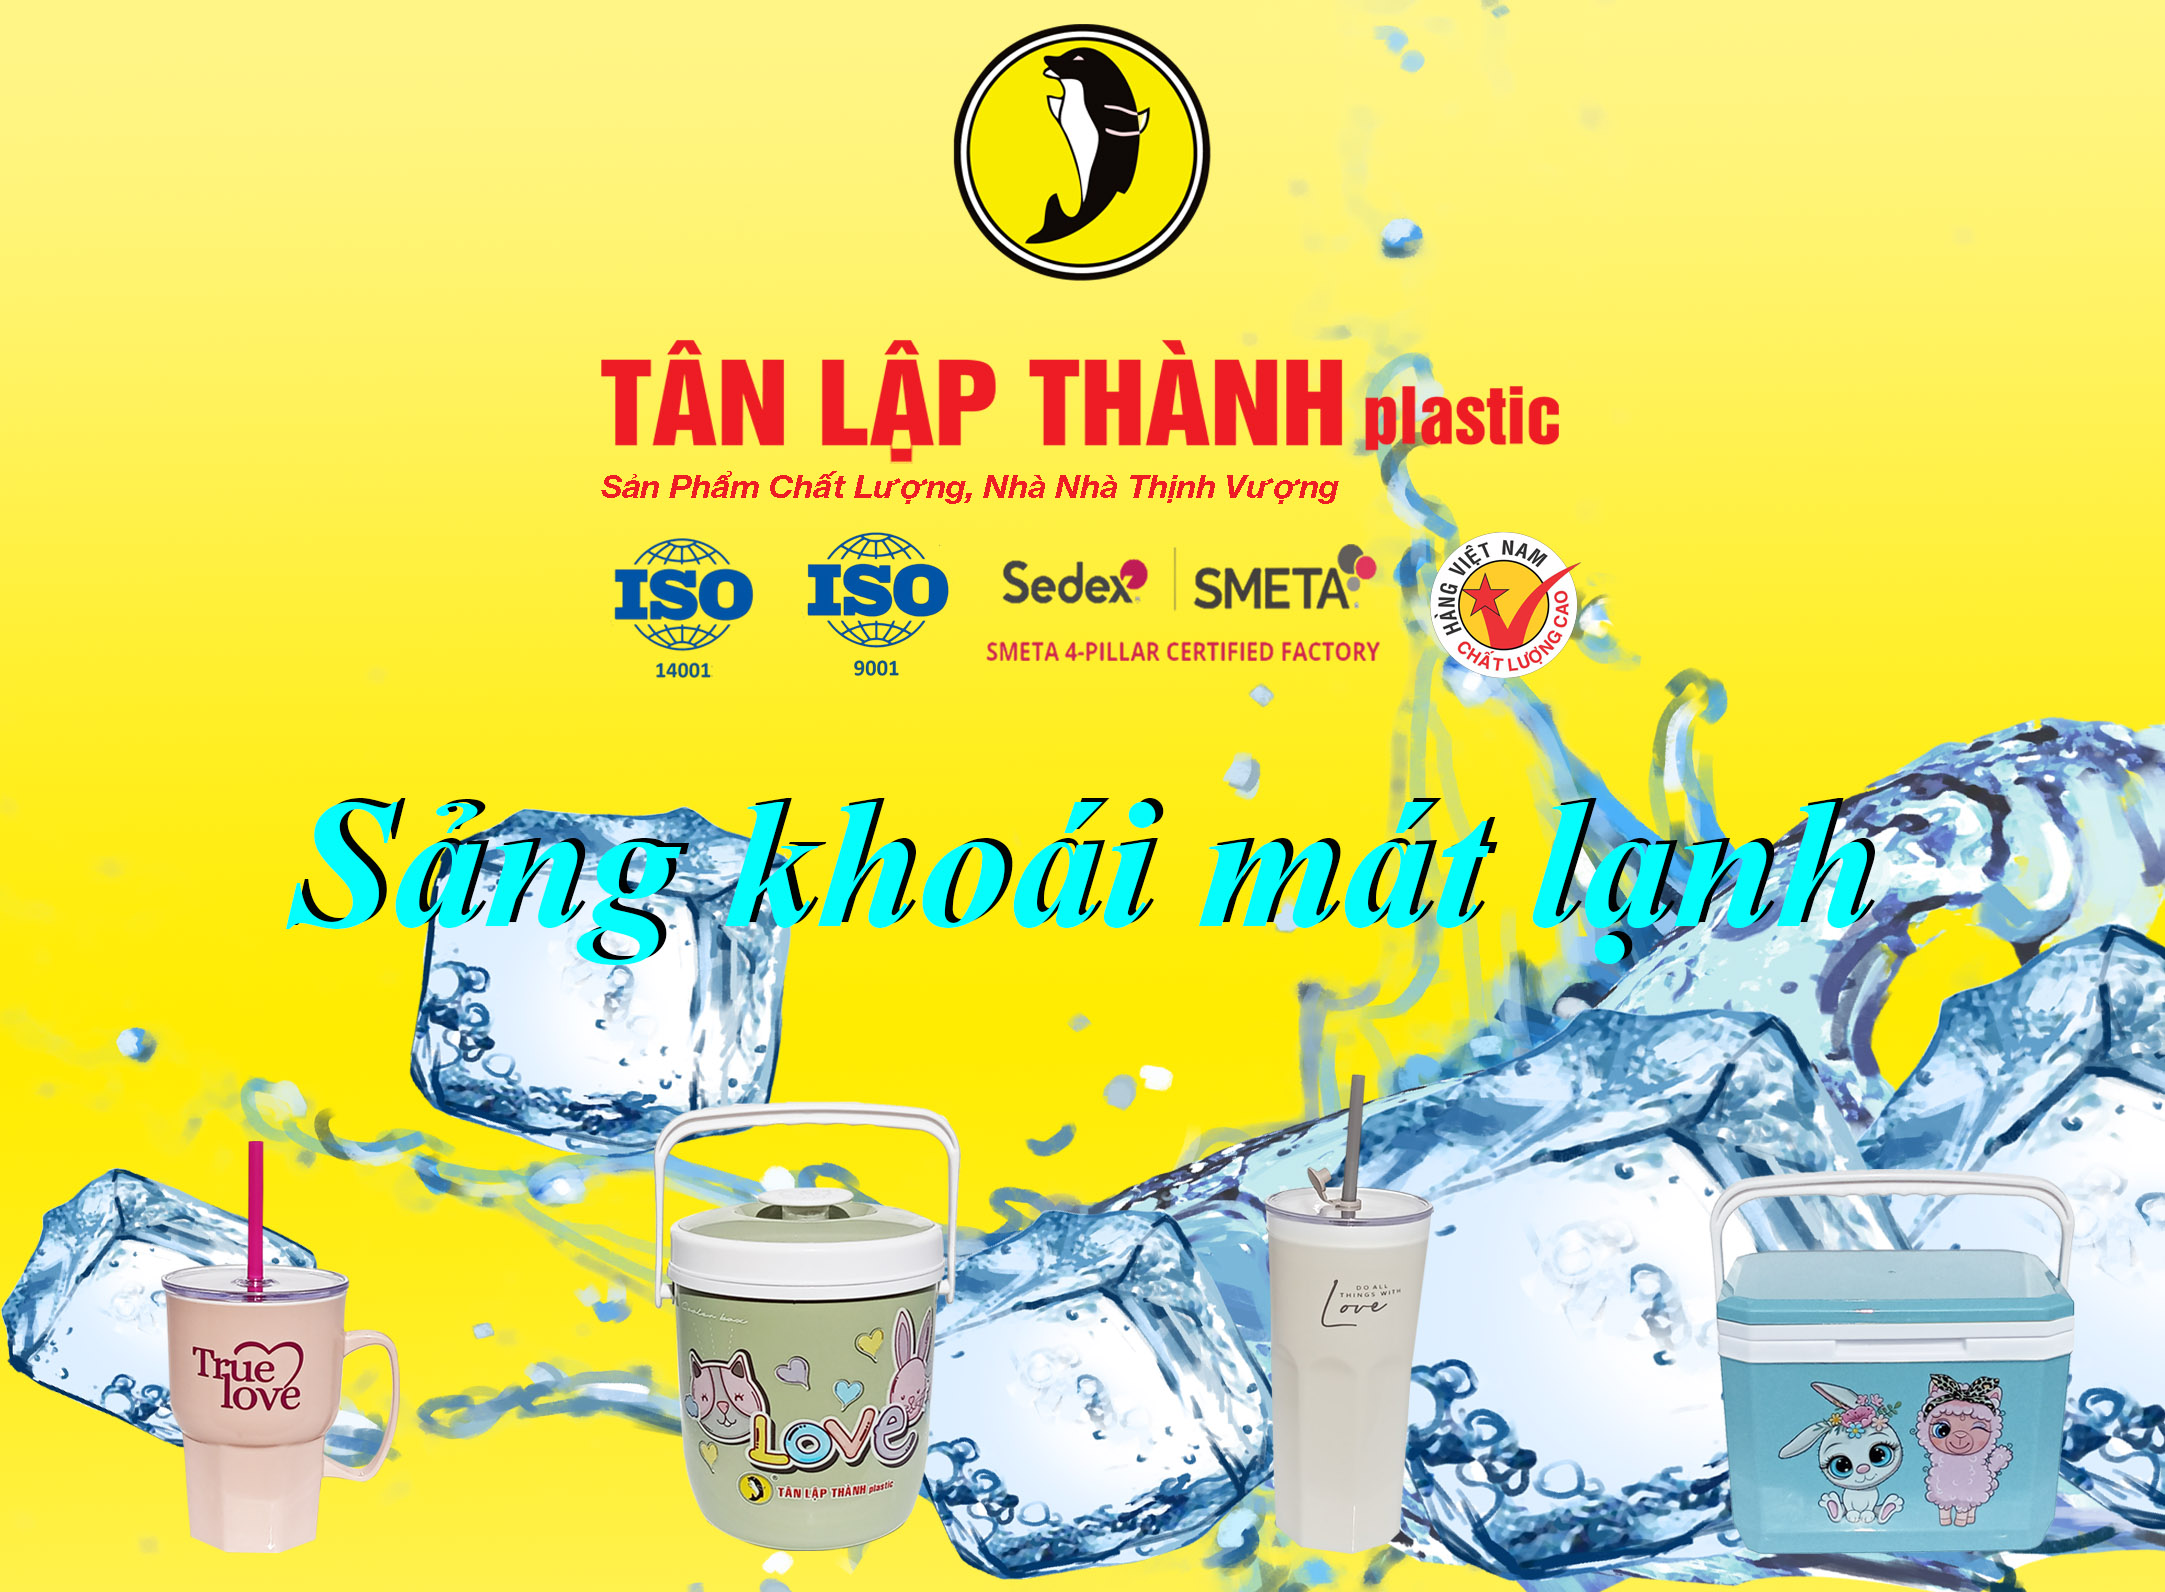 TAN LAP THANH PLASTIC CREATES A "FRESH AND COOL" SUMMER